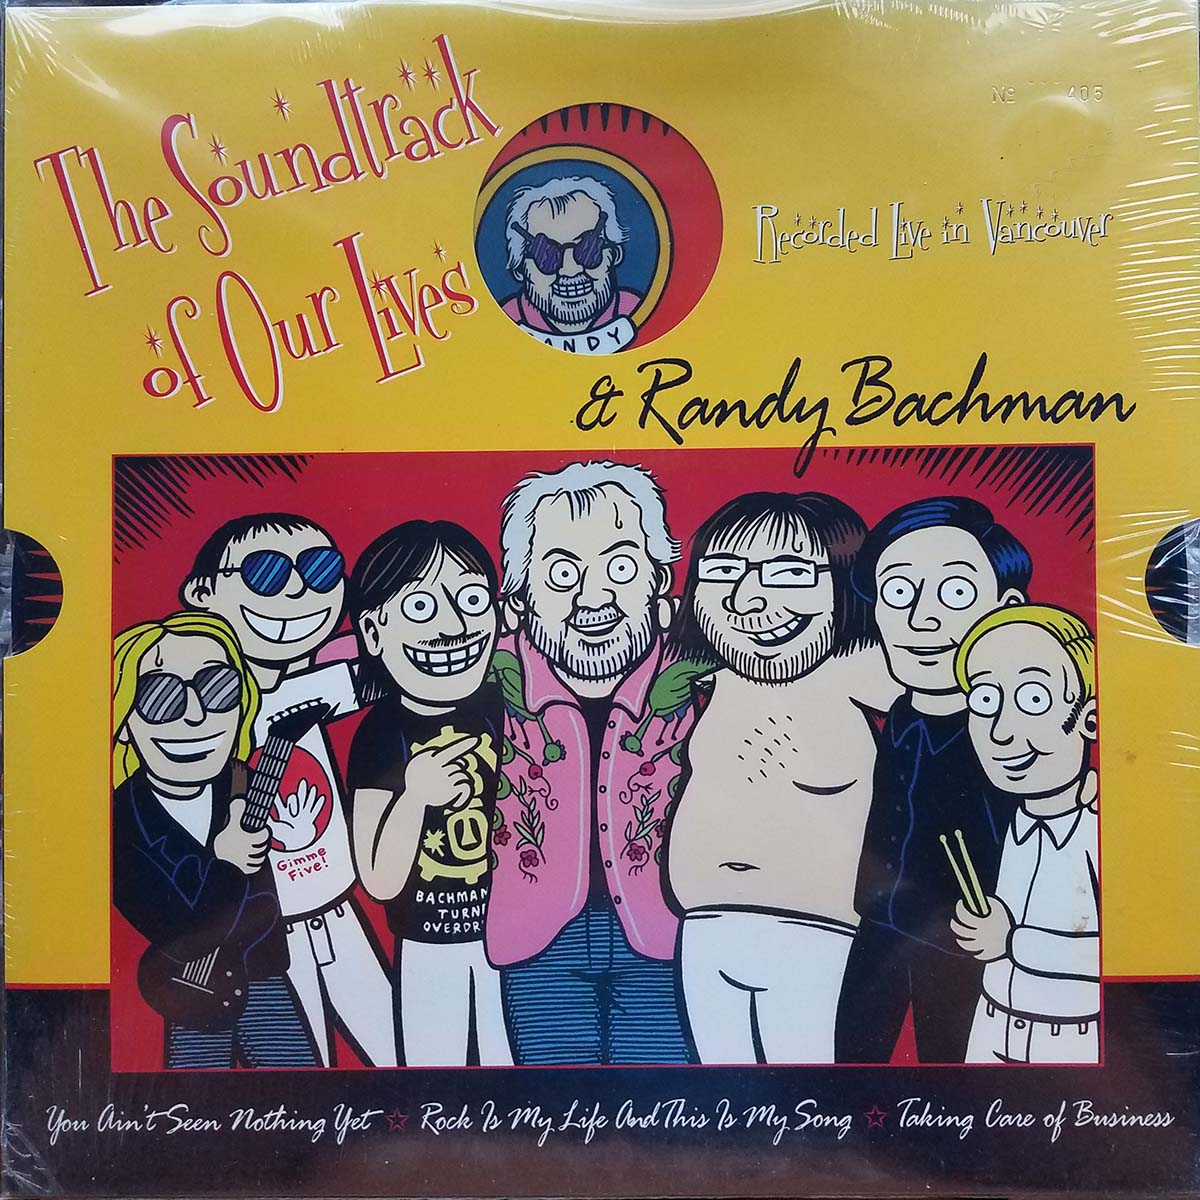 The Soundtrack Of Our Lives & Randy Bachman - Recorded Live In Vancouver